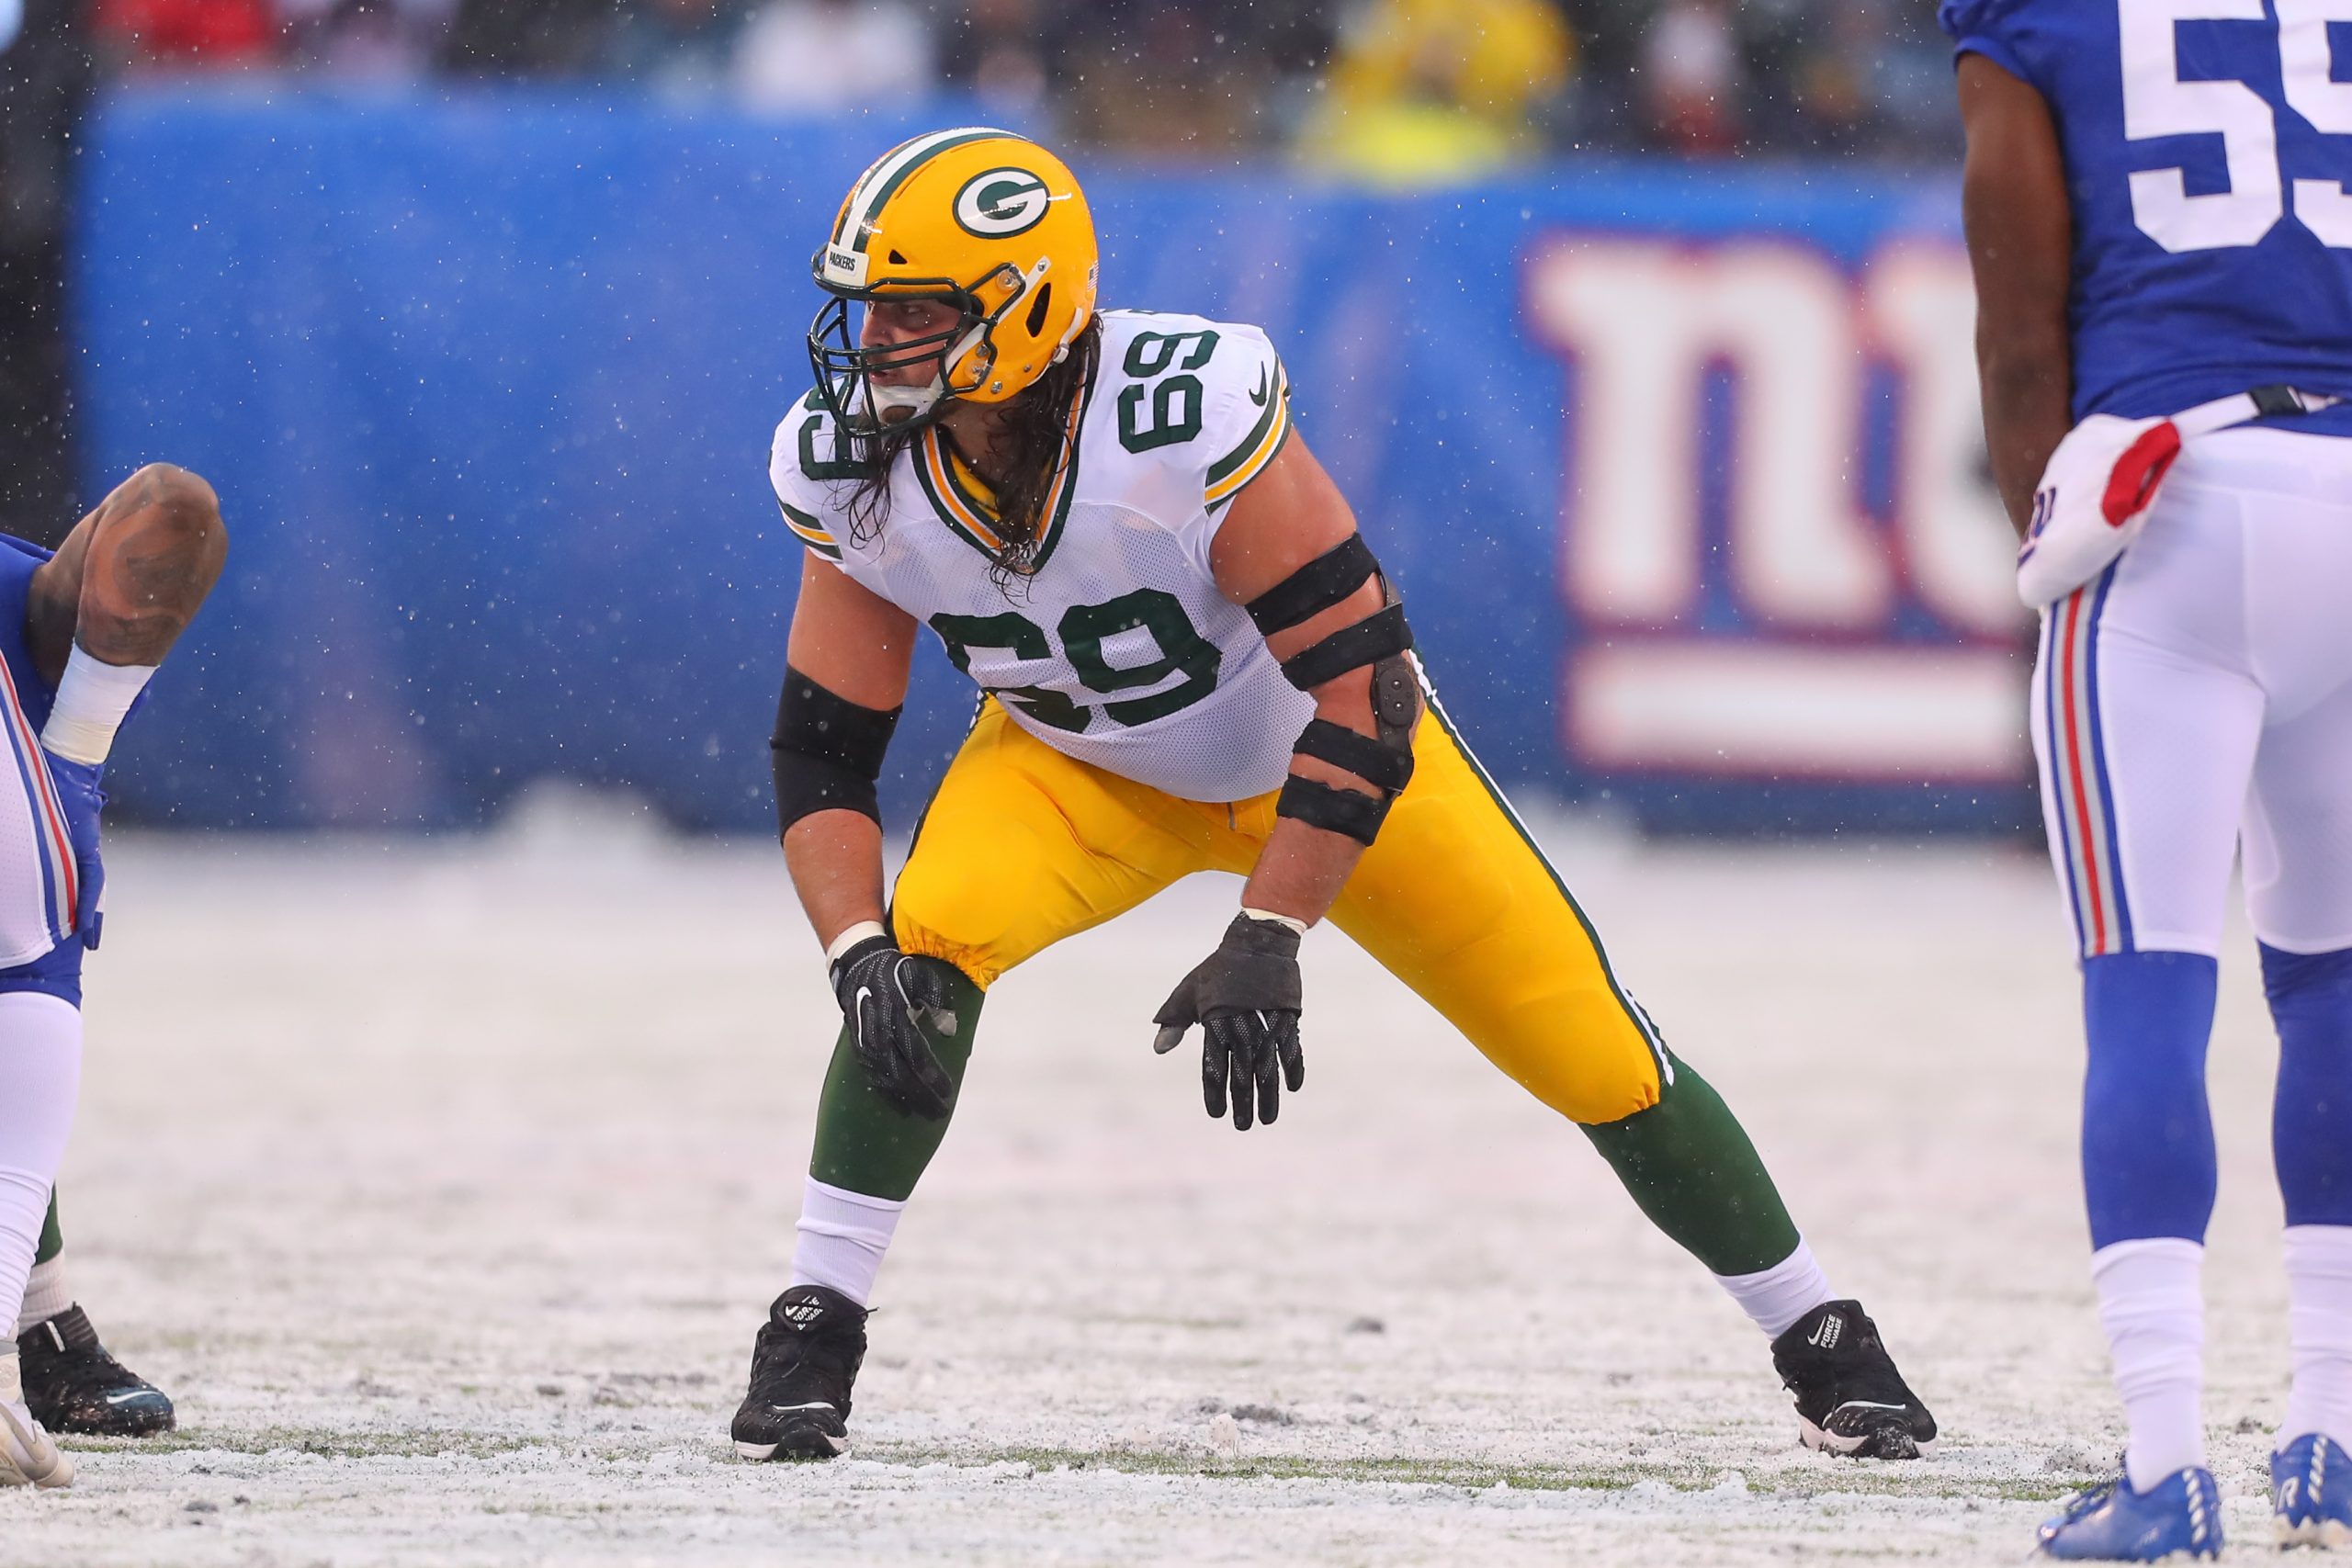 EAST RUTHERFORD, NJ - DECEMBER 01: Green Bay Packers offensive tackle David Bakhtiari (69) during the National Football